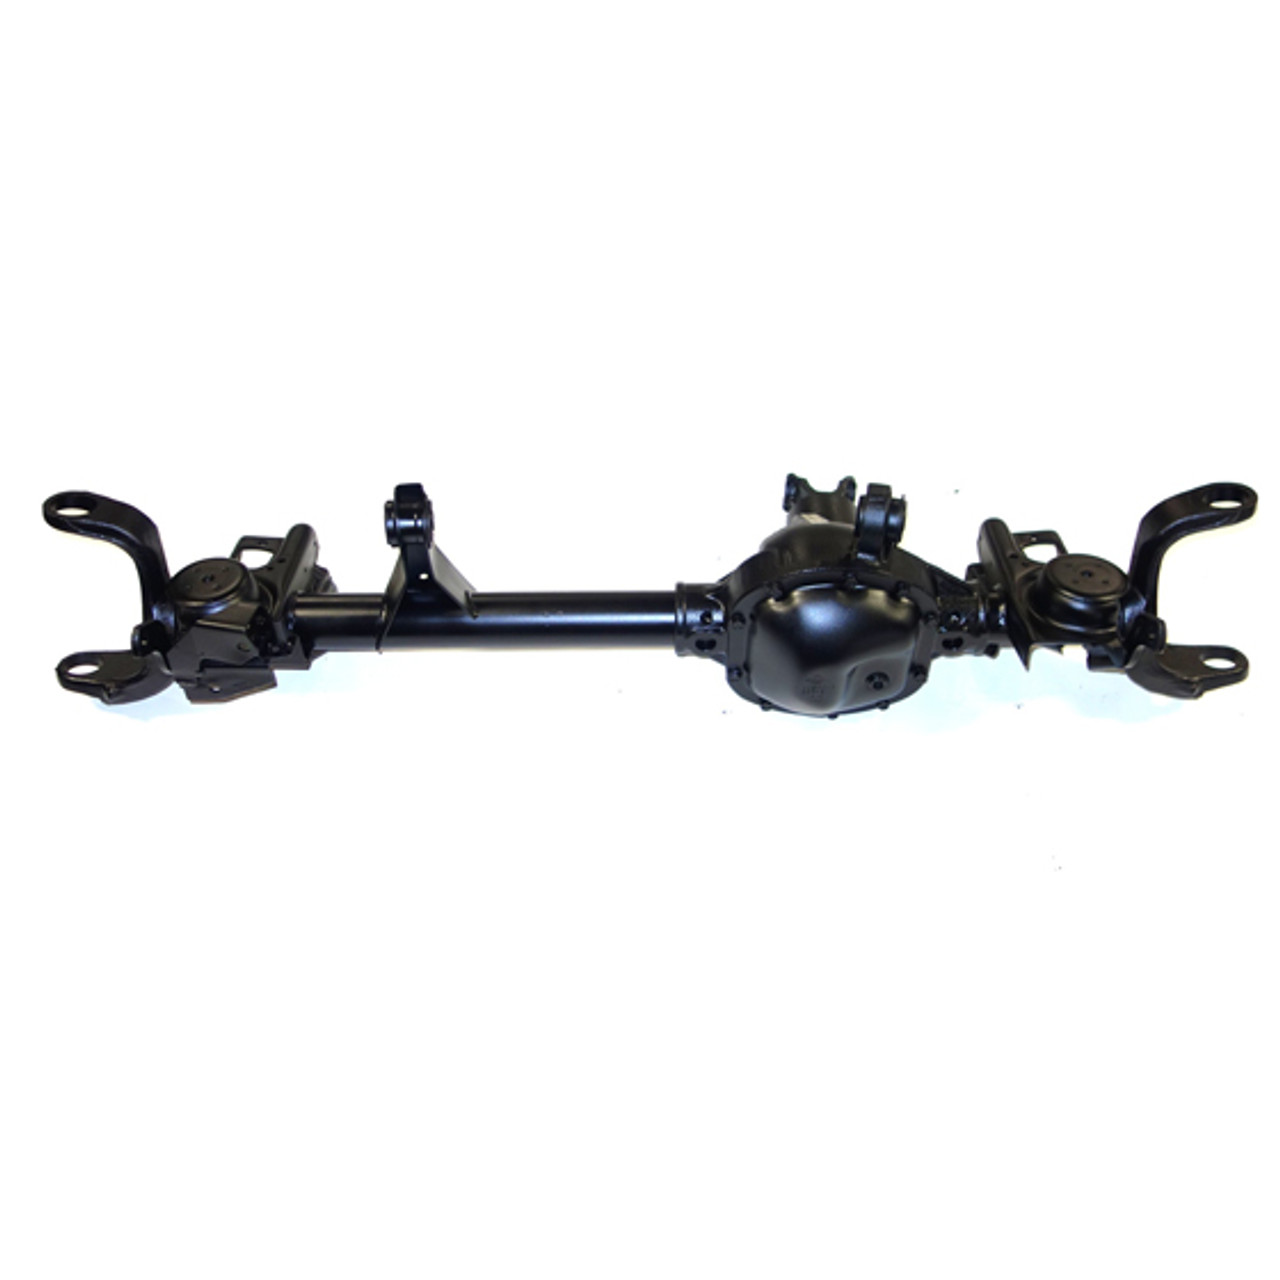 Reman Complete Axle Assembly for Dana 30 90-95 Jeep Wrangler 3.07 Ratio with ABS